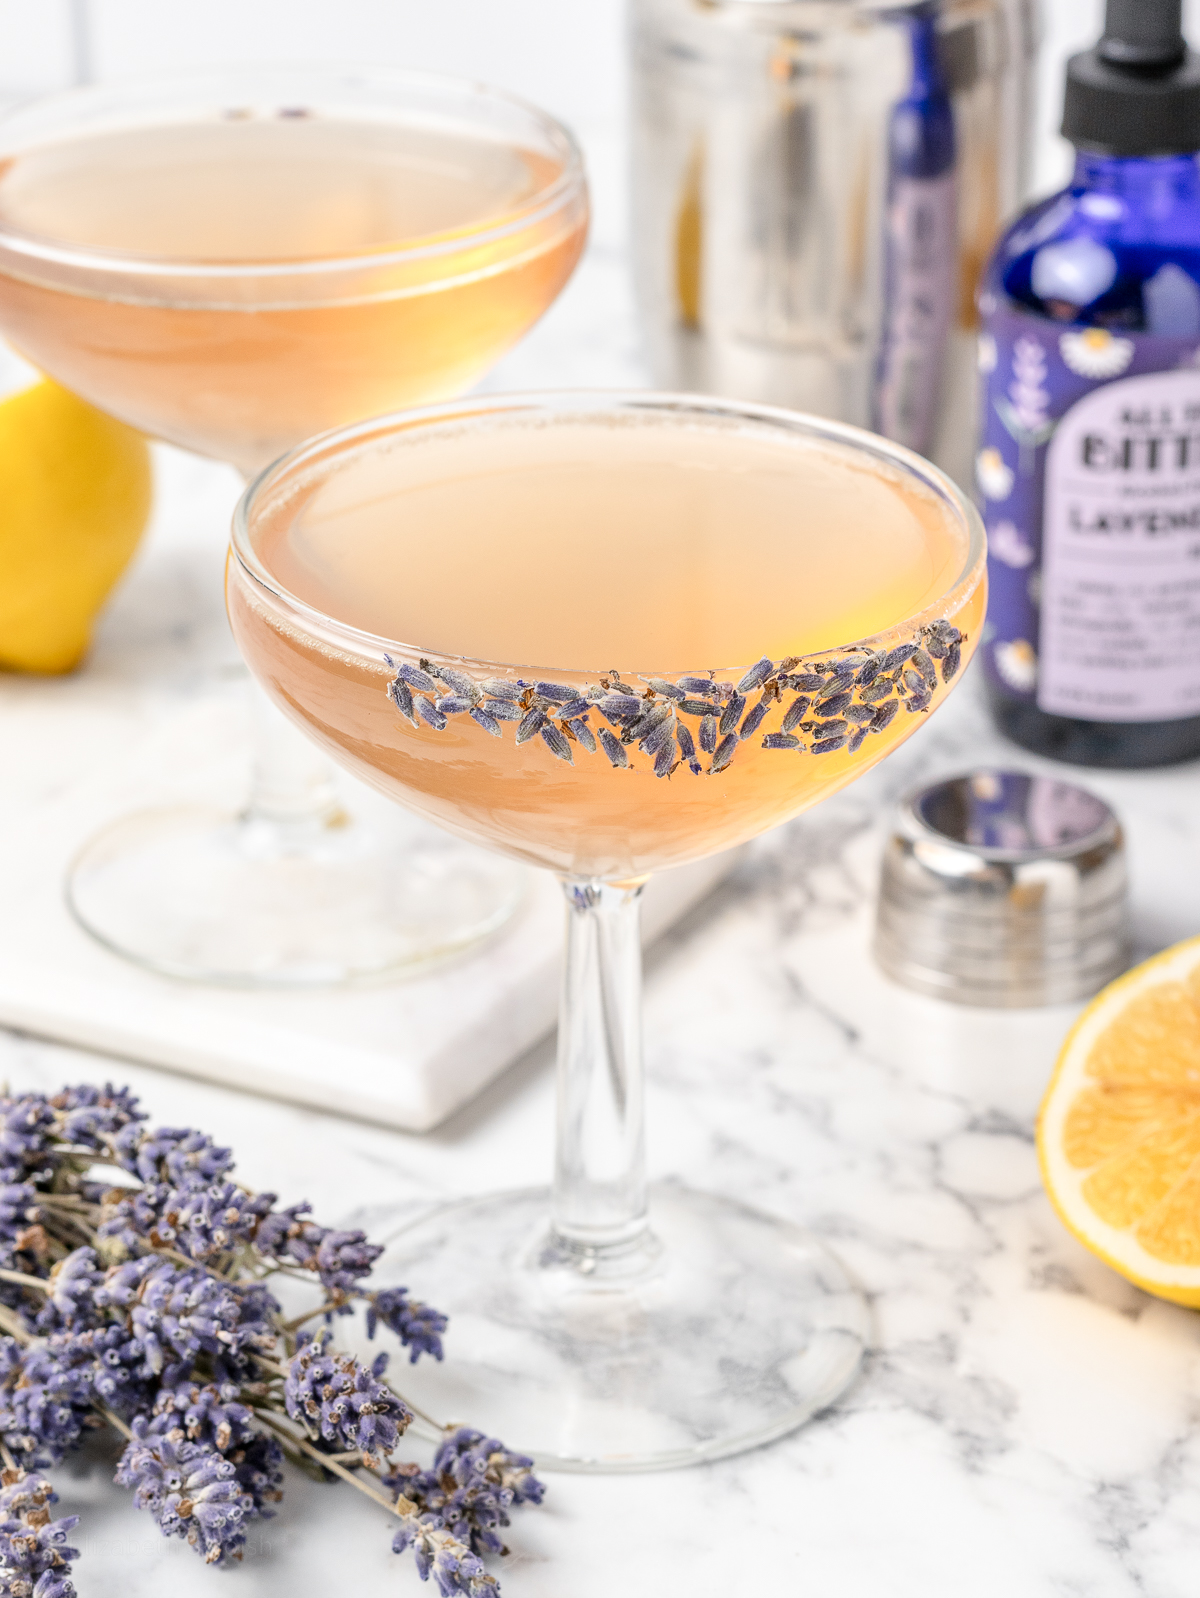 Two coupe glasses filled with the Sparkling Lavender Mocktail. One glass is garnished with a lavender bud rim and more lavender flowers on the side.